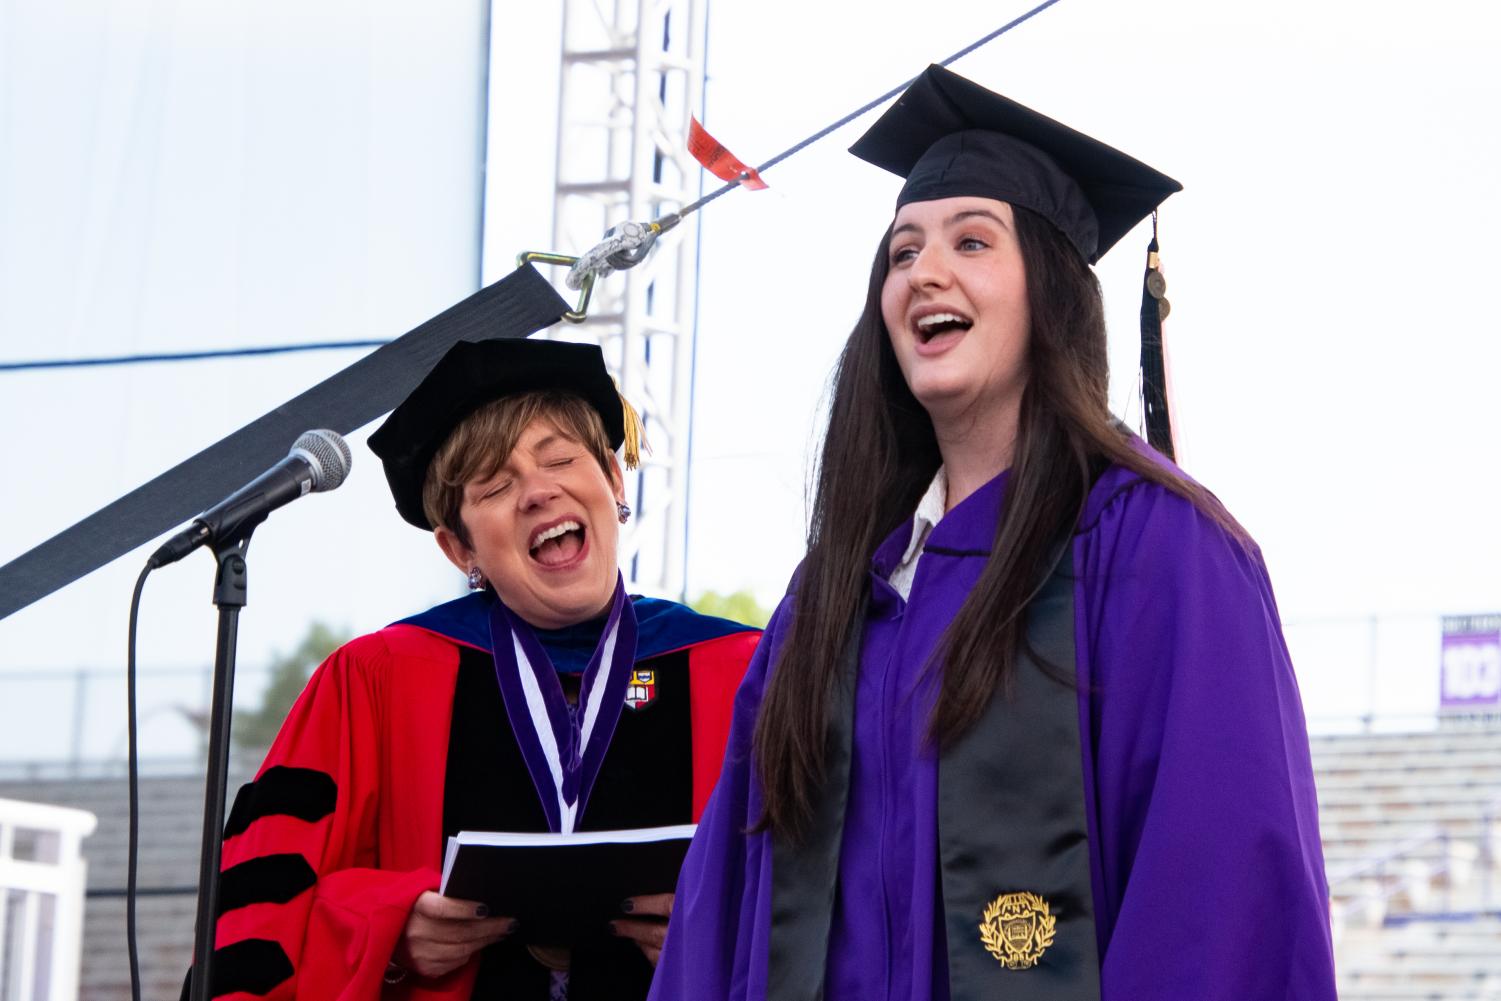 A student in a purple robe sings alongside another person in red.